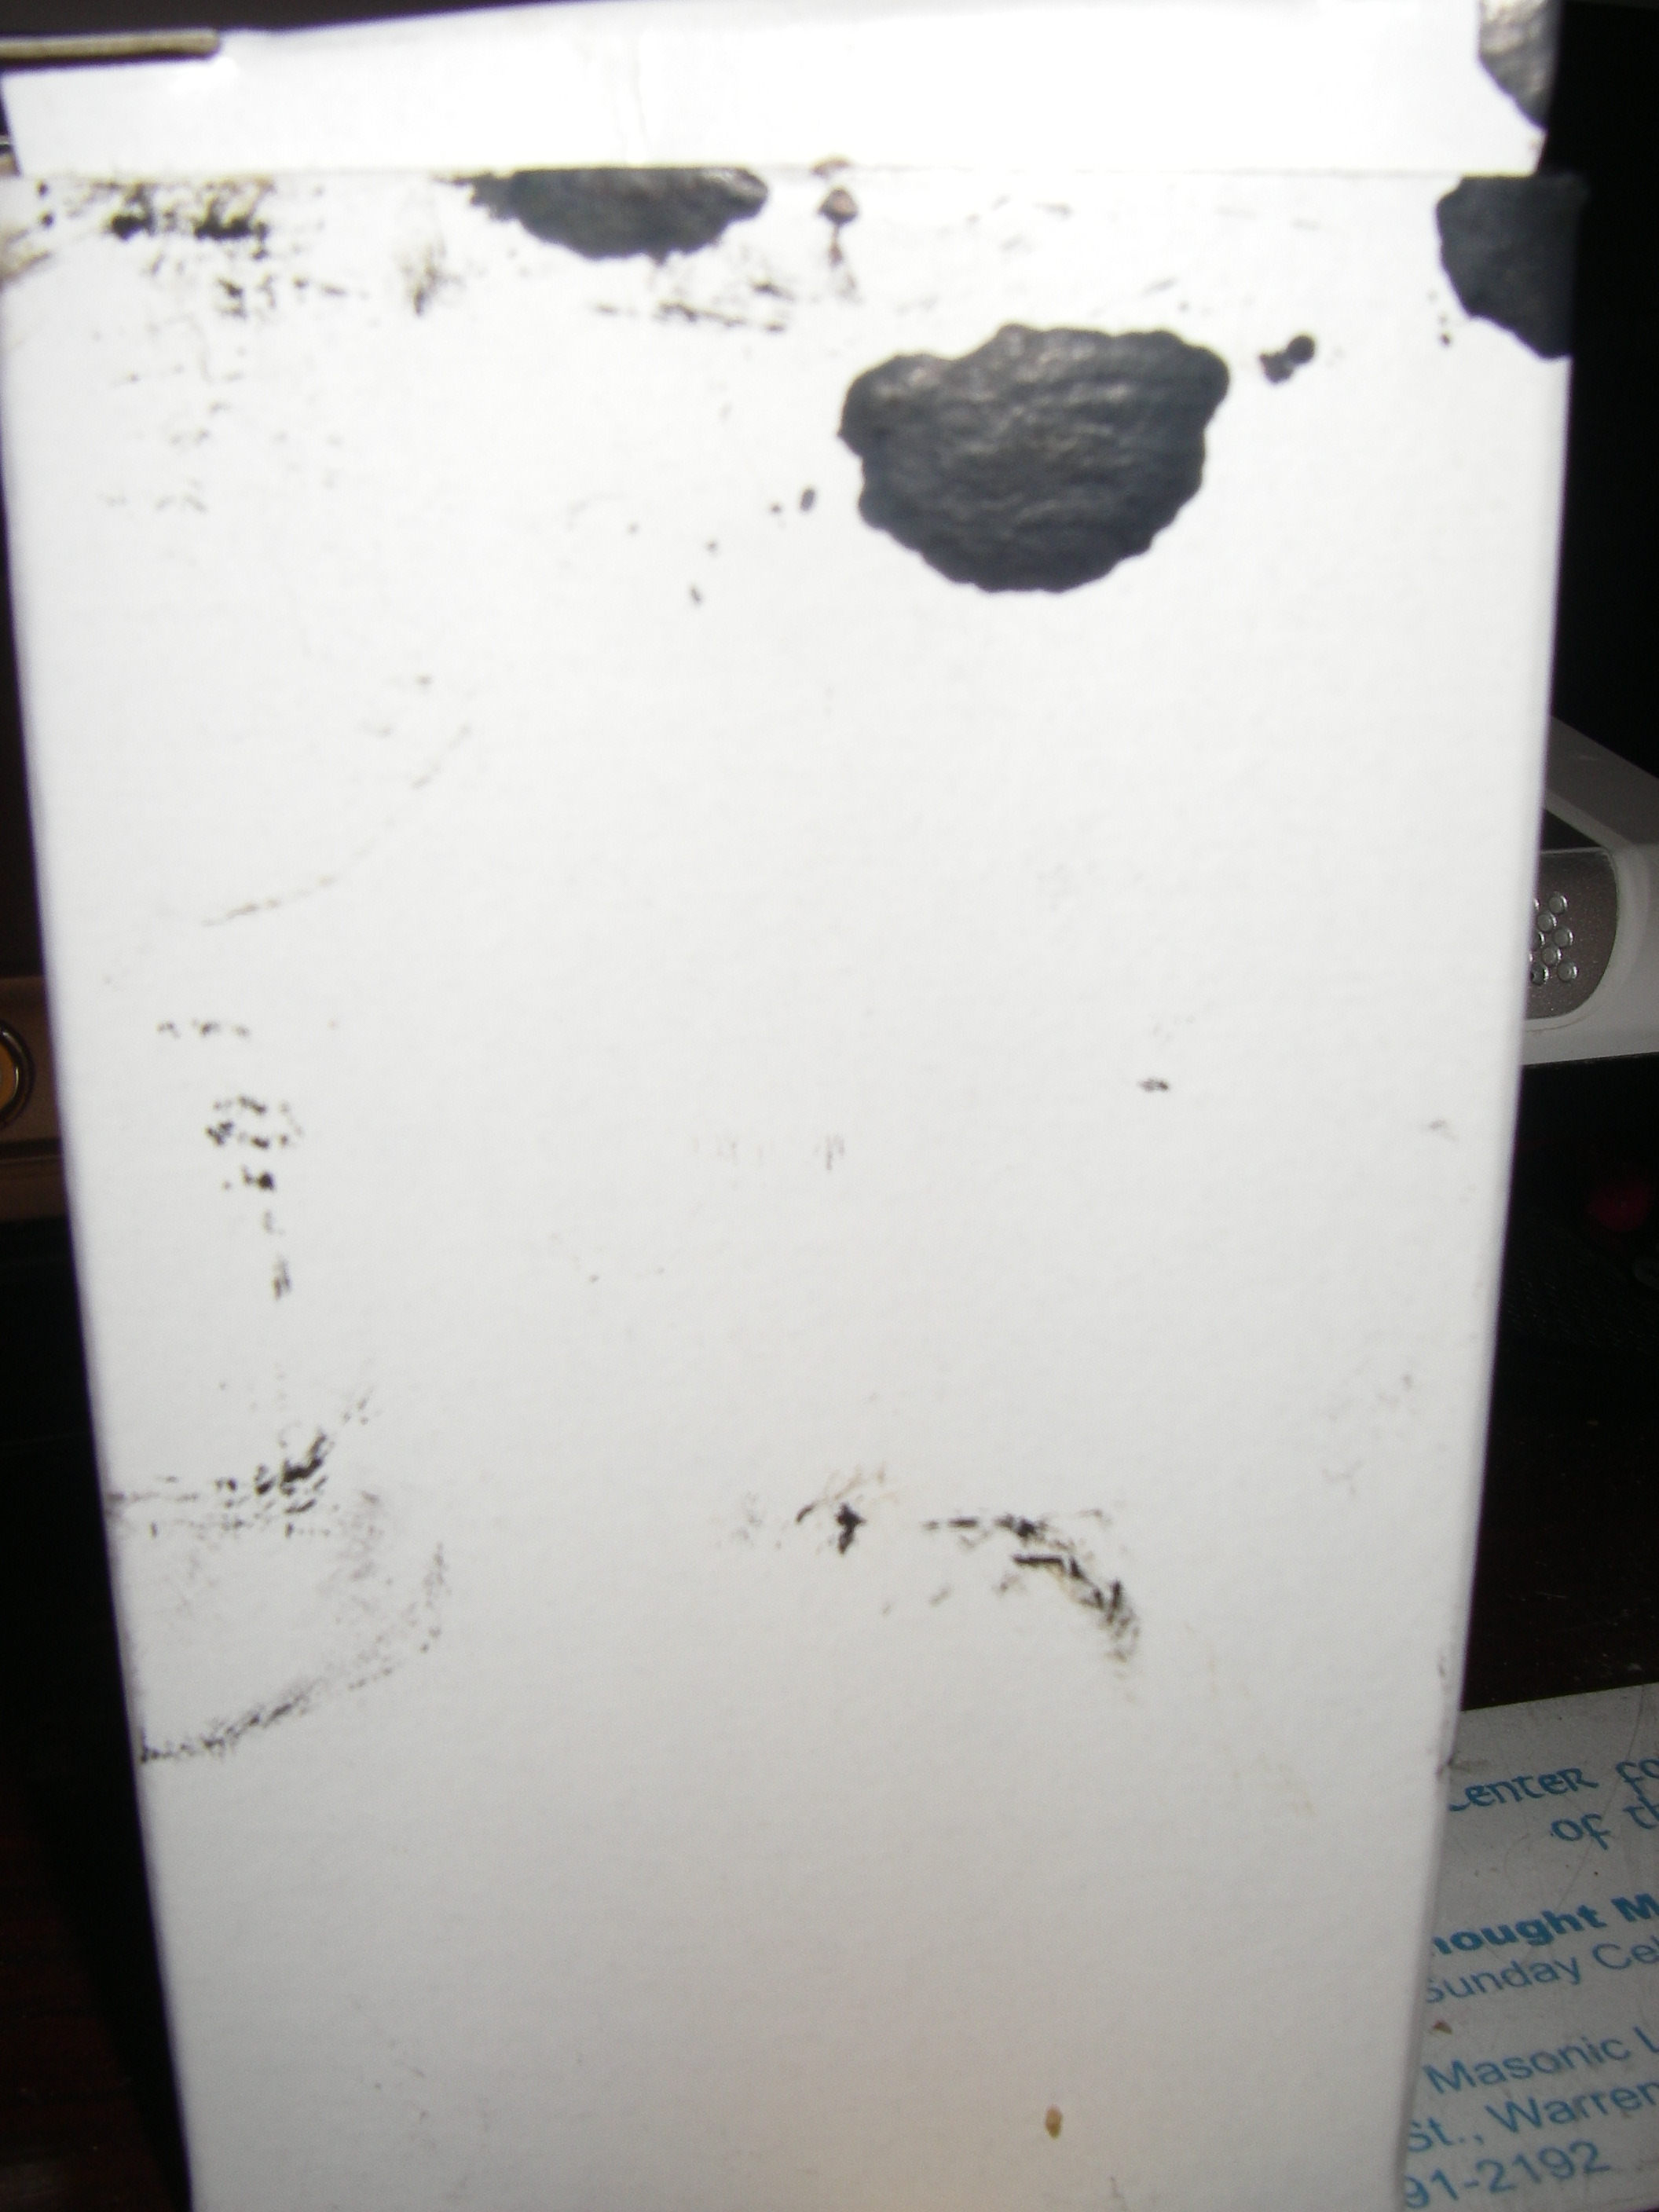 Back of TFP cartridge box. Note all the ink blots all over the box.